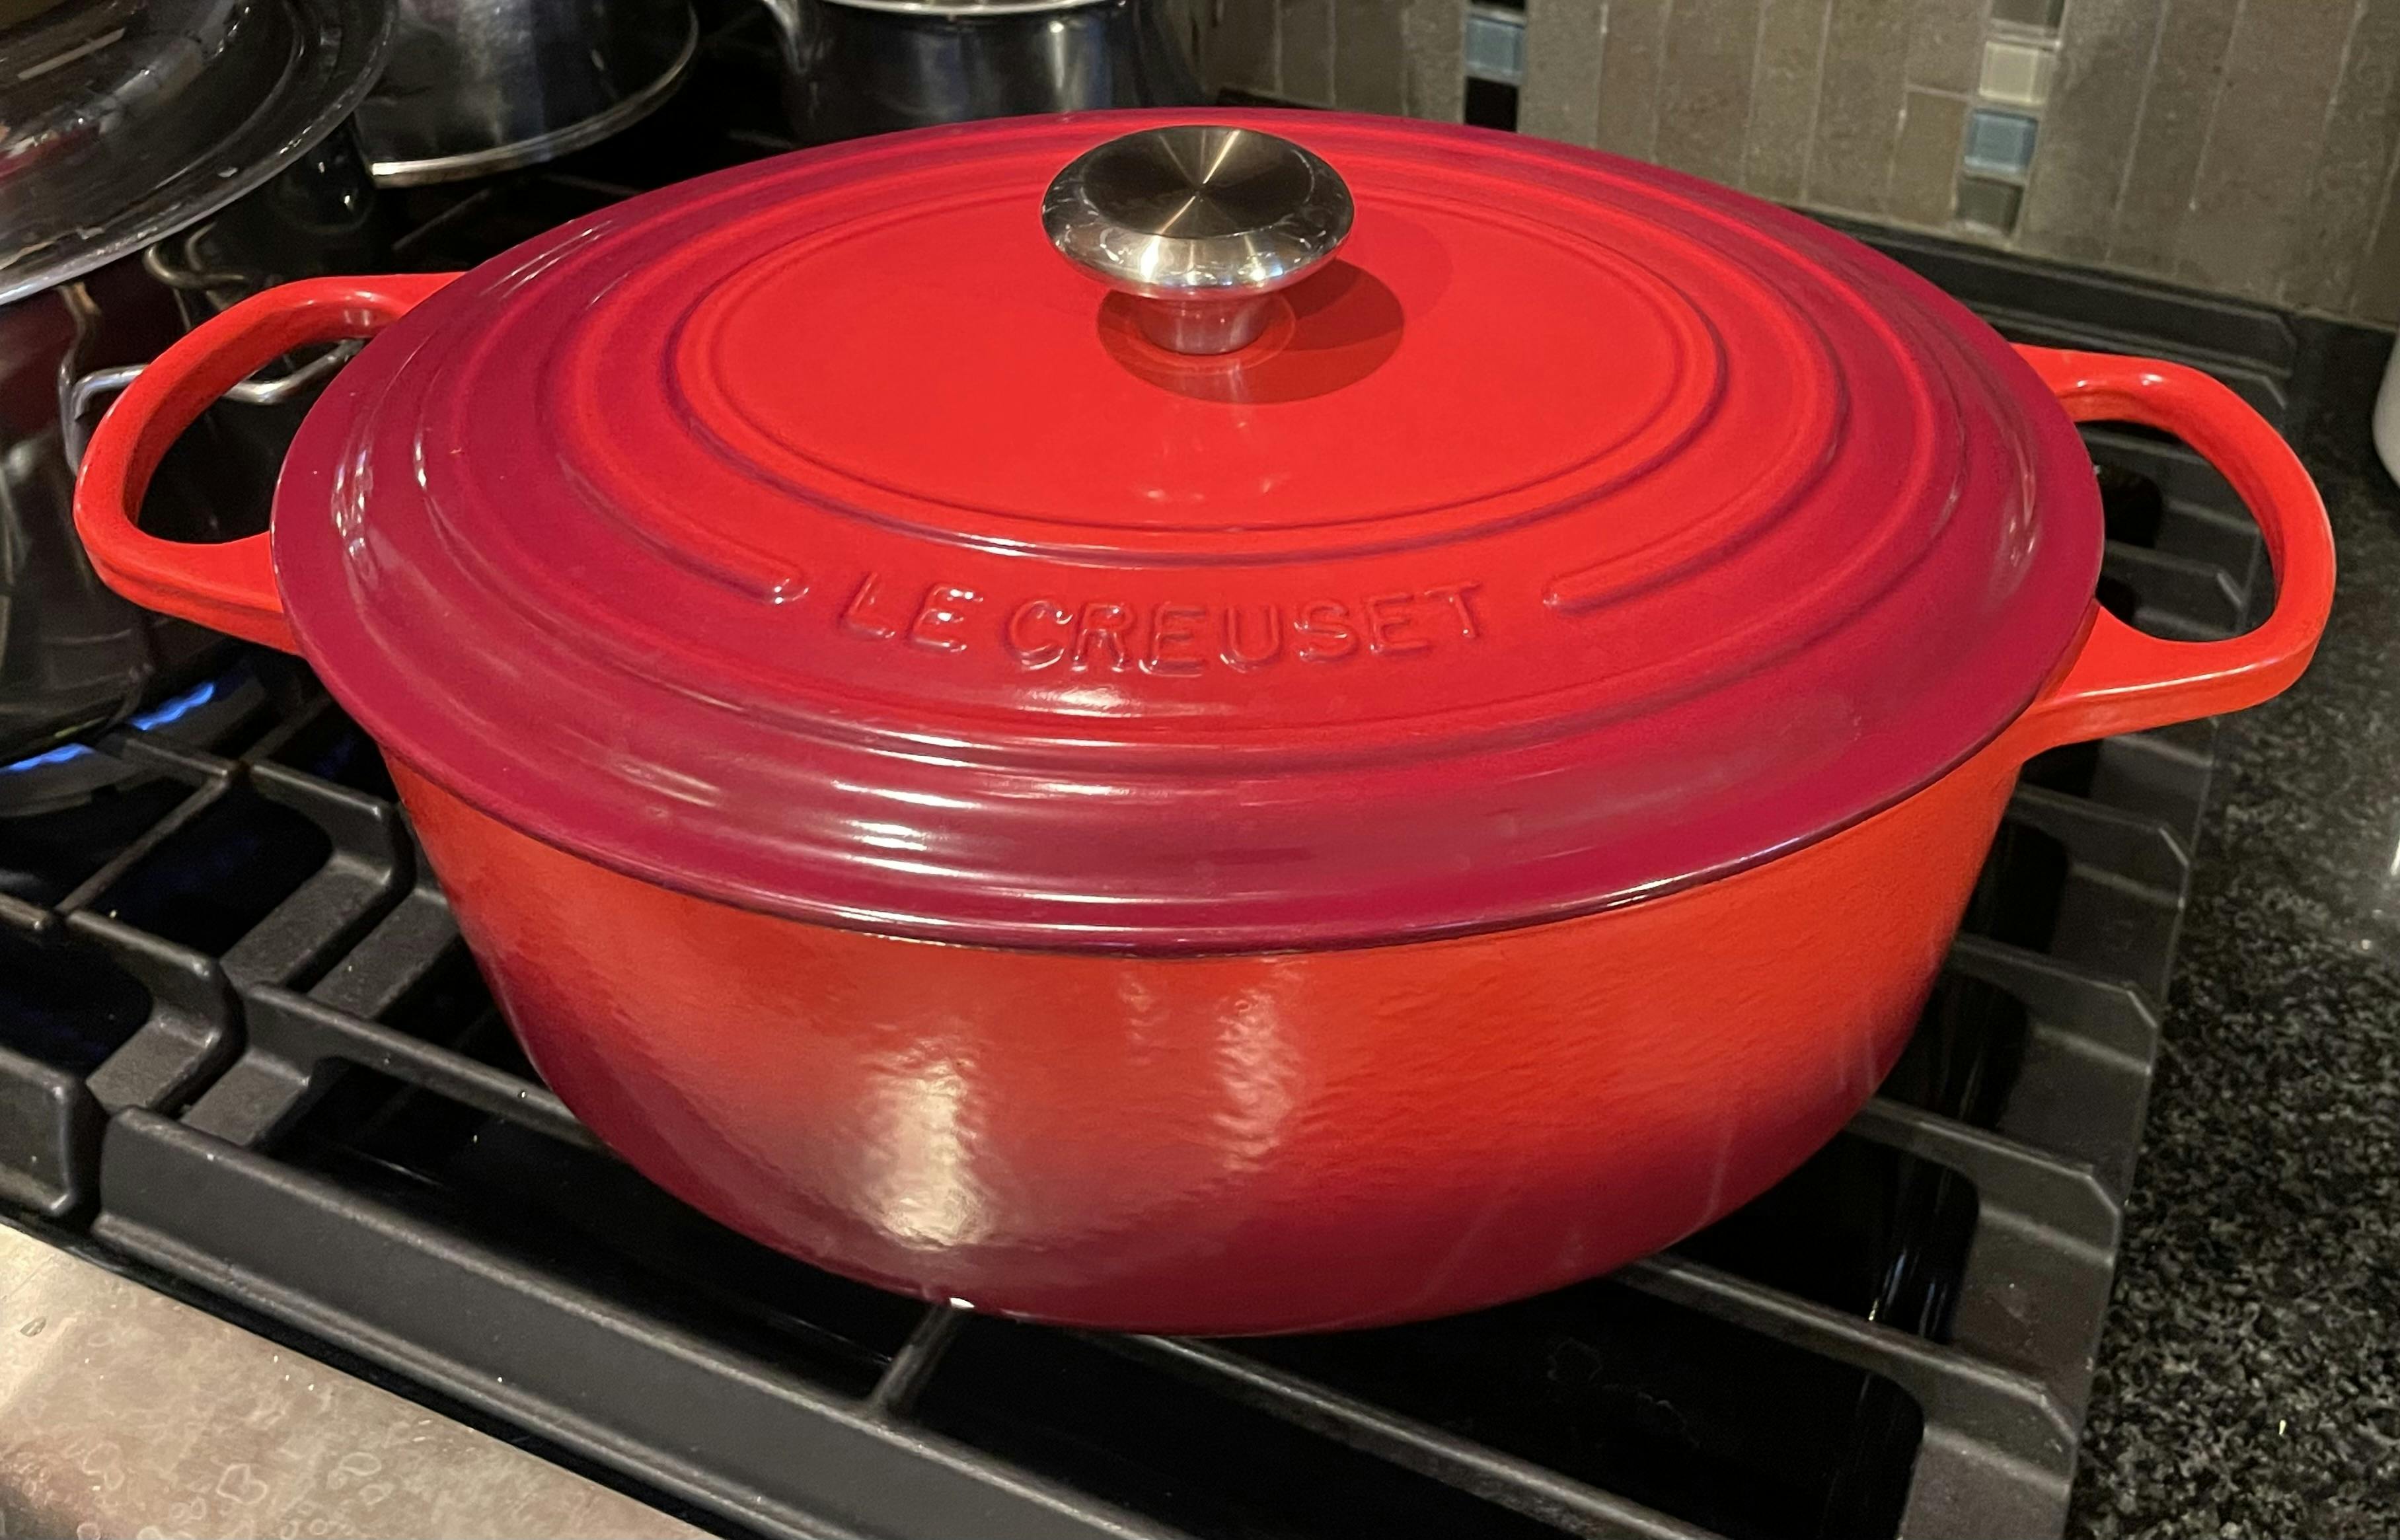 Cerise LE CREUSET Silicone Skillet Handle Sleeve Protector Cool Tool Red  NWT